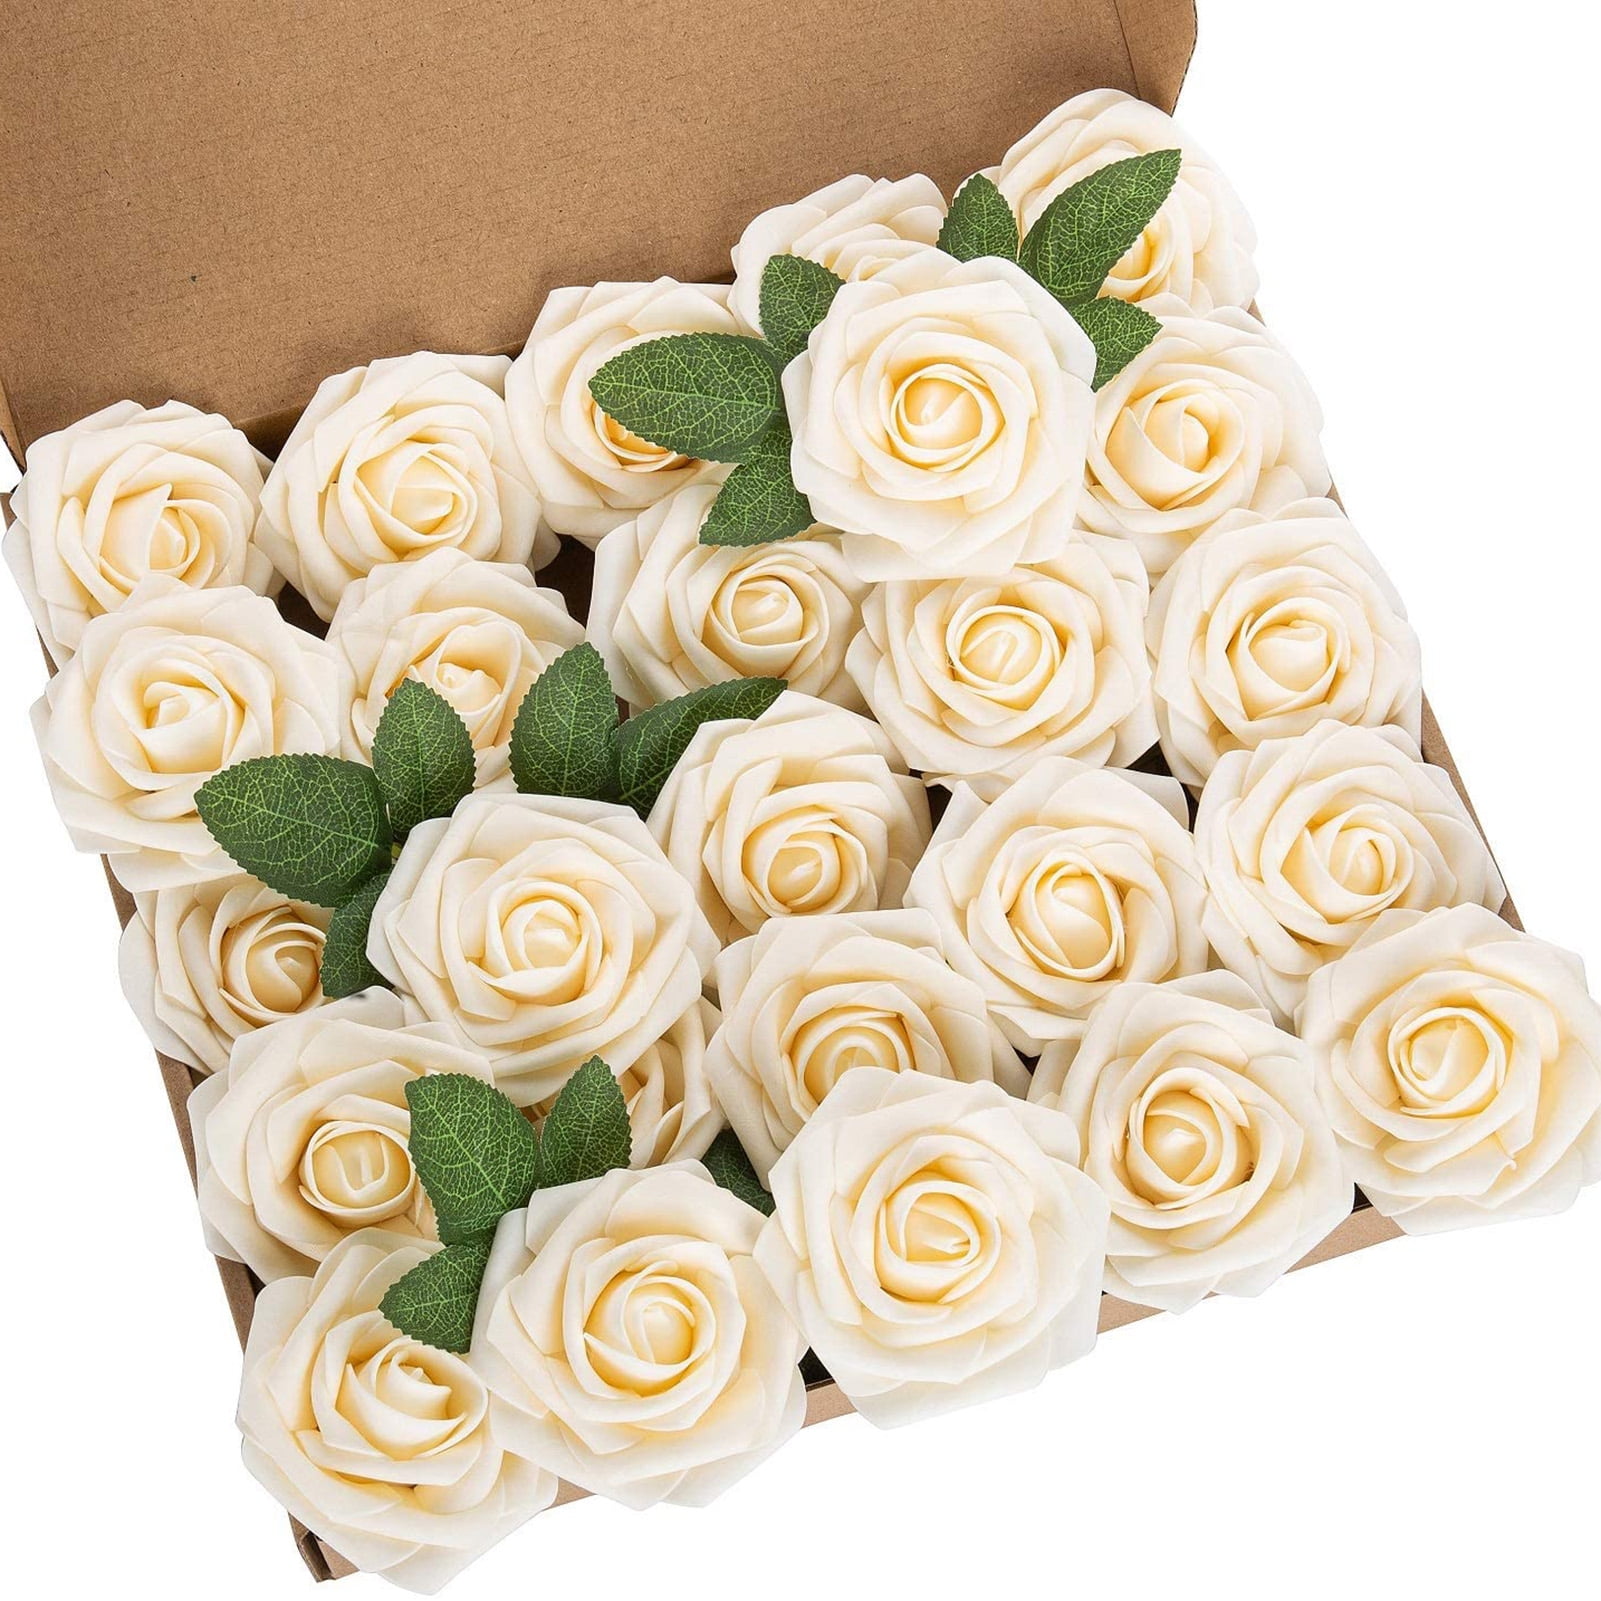 25Pcs Artificial Rose Flower Heads For Wedding/Office Indoor/Outdoor Decor White 